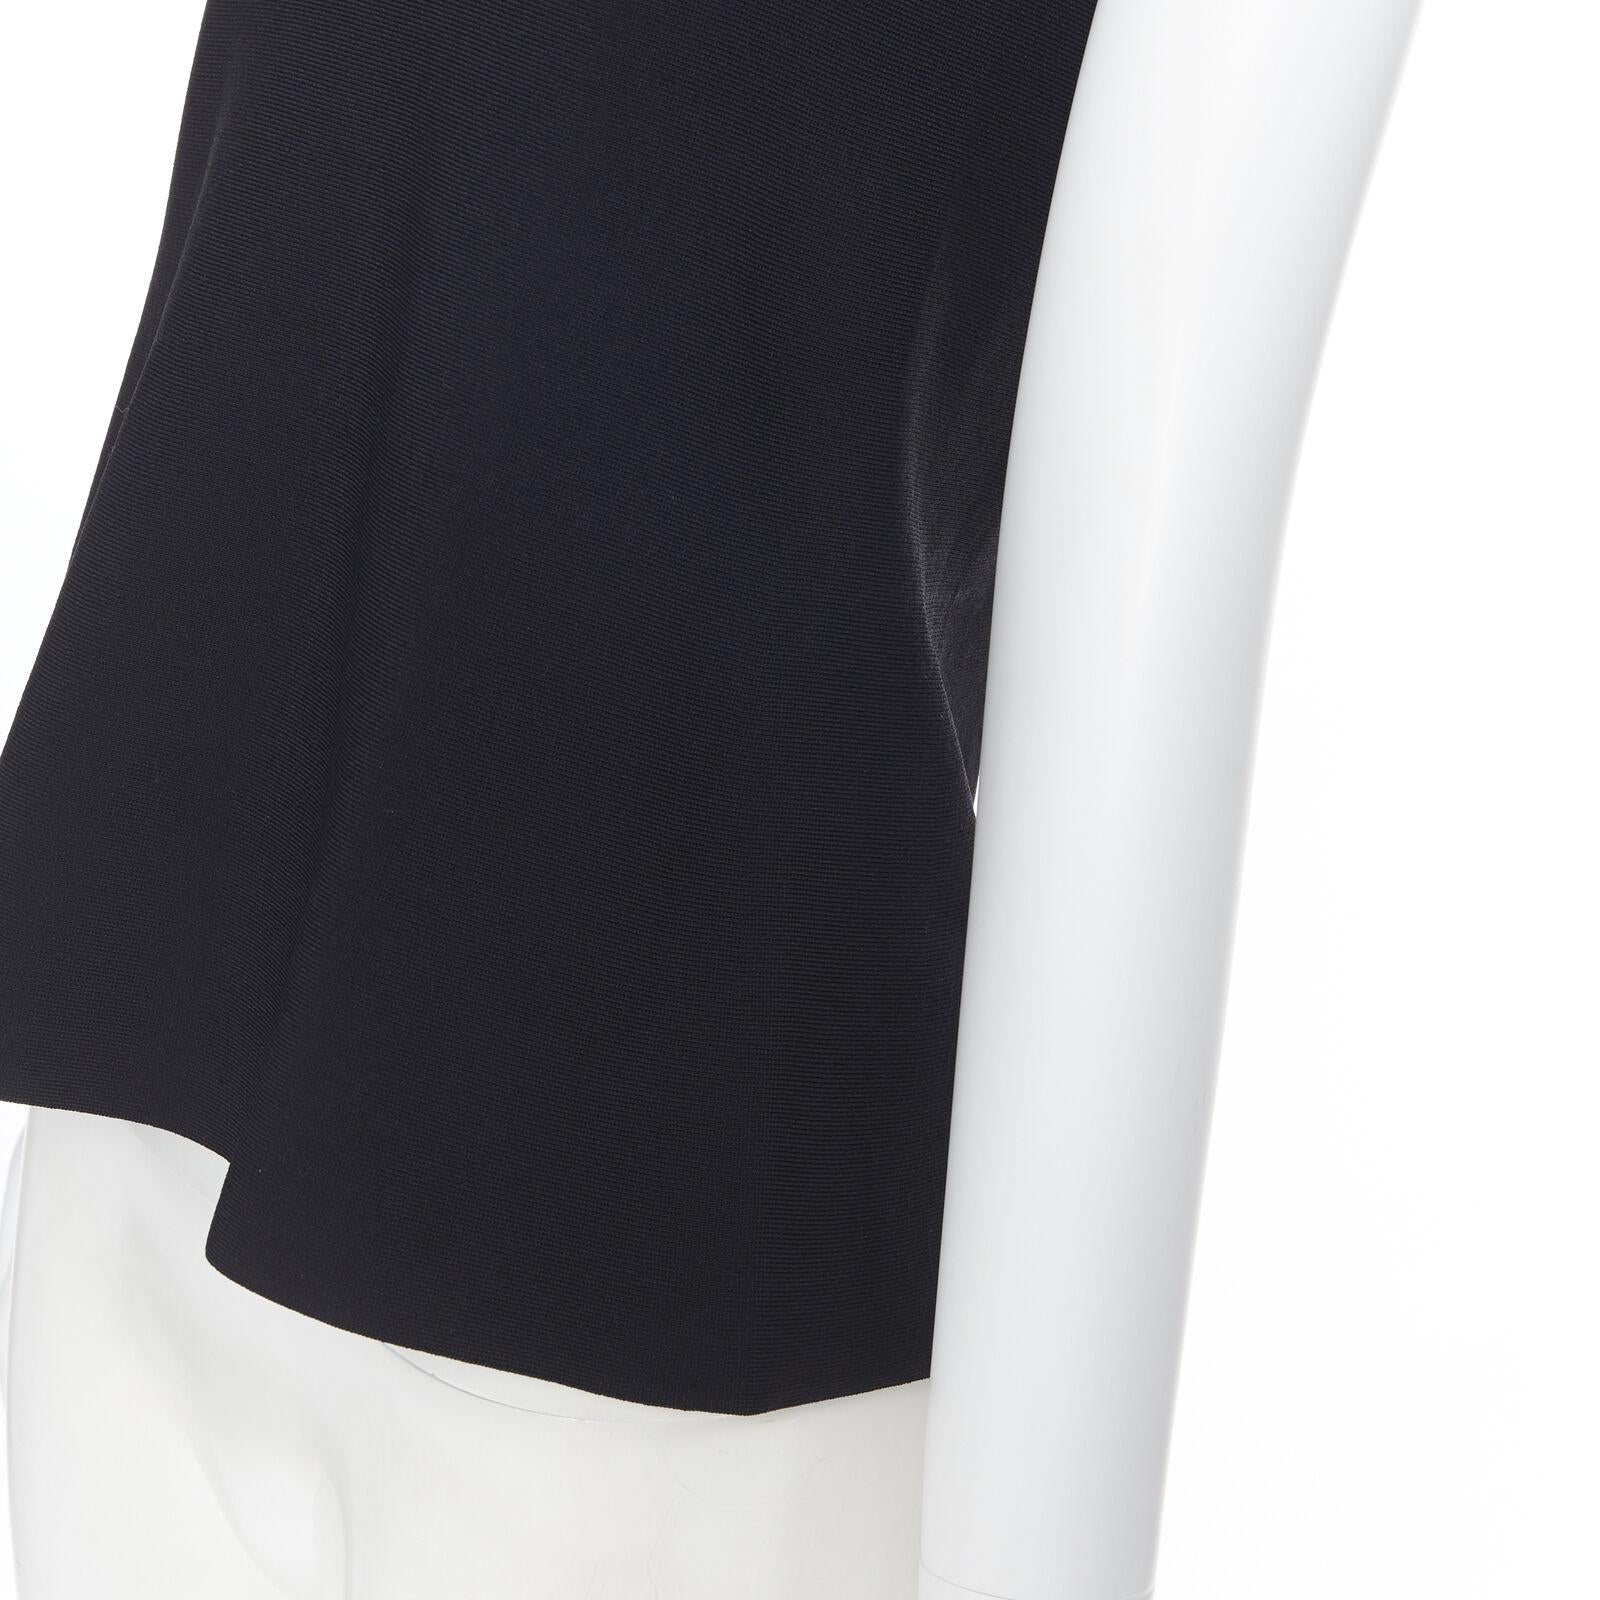 NARCISO RODRIGUEZ black viscose knit stretchy sleeveless top IT38
Reference: SNKO/A00051
Brand: Narciso Rodriguez
Material: Viscose, Blend
Color: Black
Pattern: Solid
Extra Details: Stretch fit.
Made in: China

CONDITION:
Condition: Excellent, this